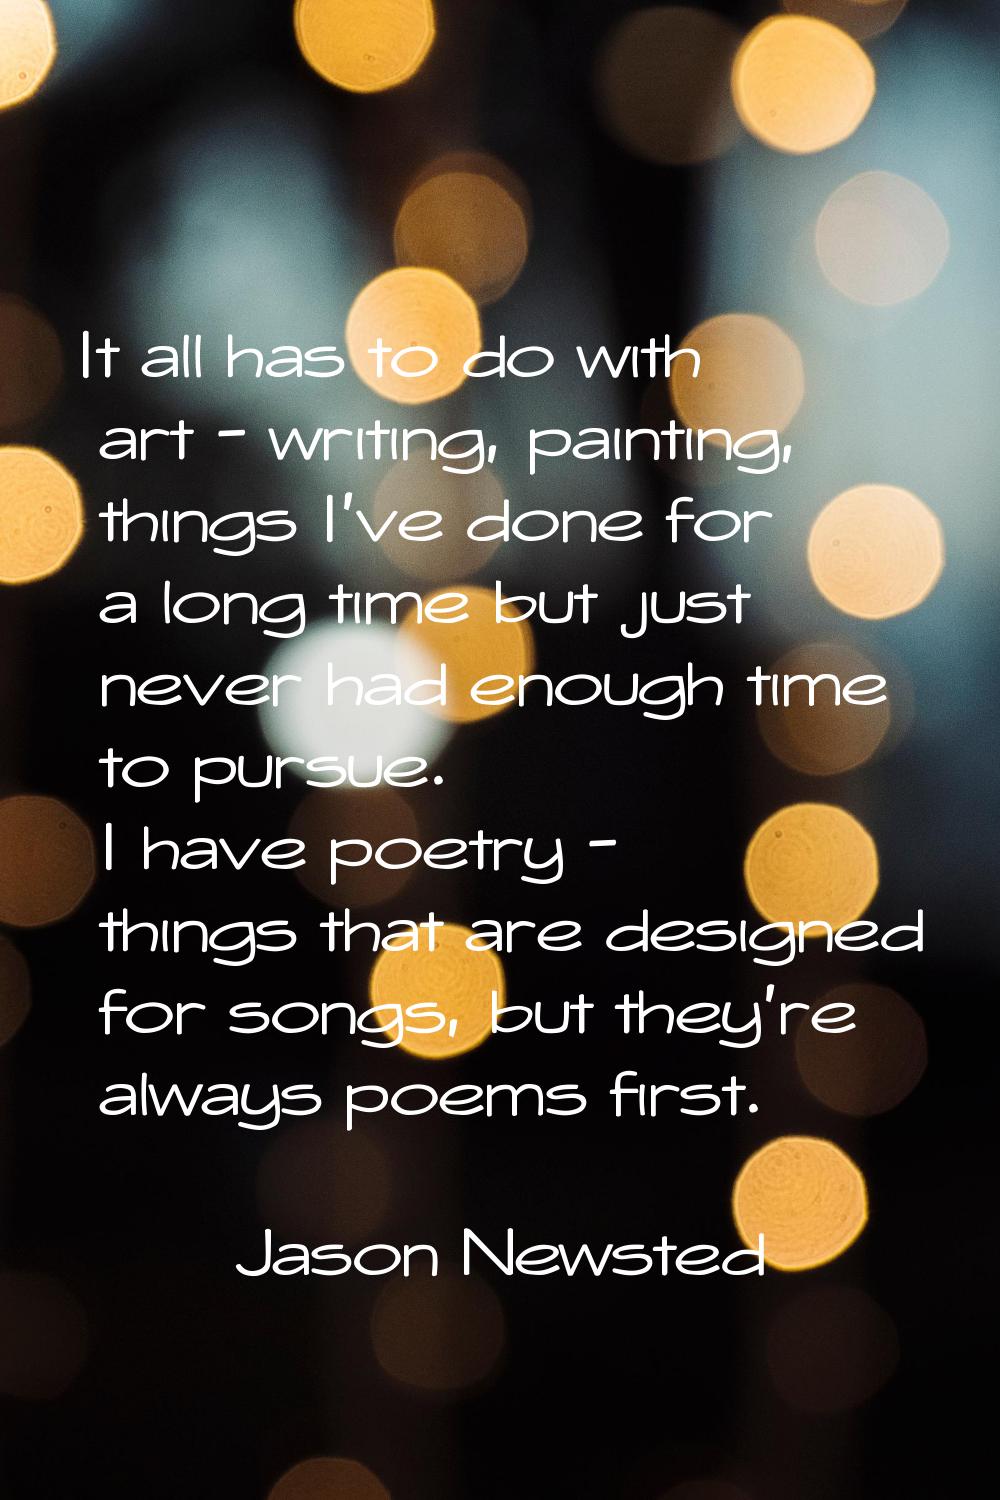 It all has to do with art - writing, painting, things I've done for a long time but just never had 